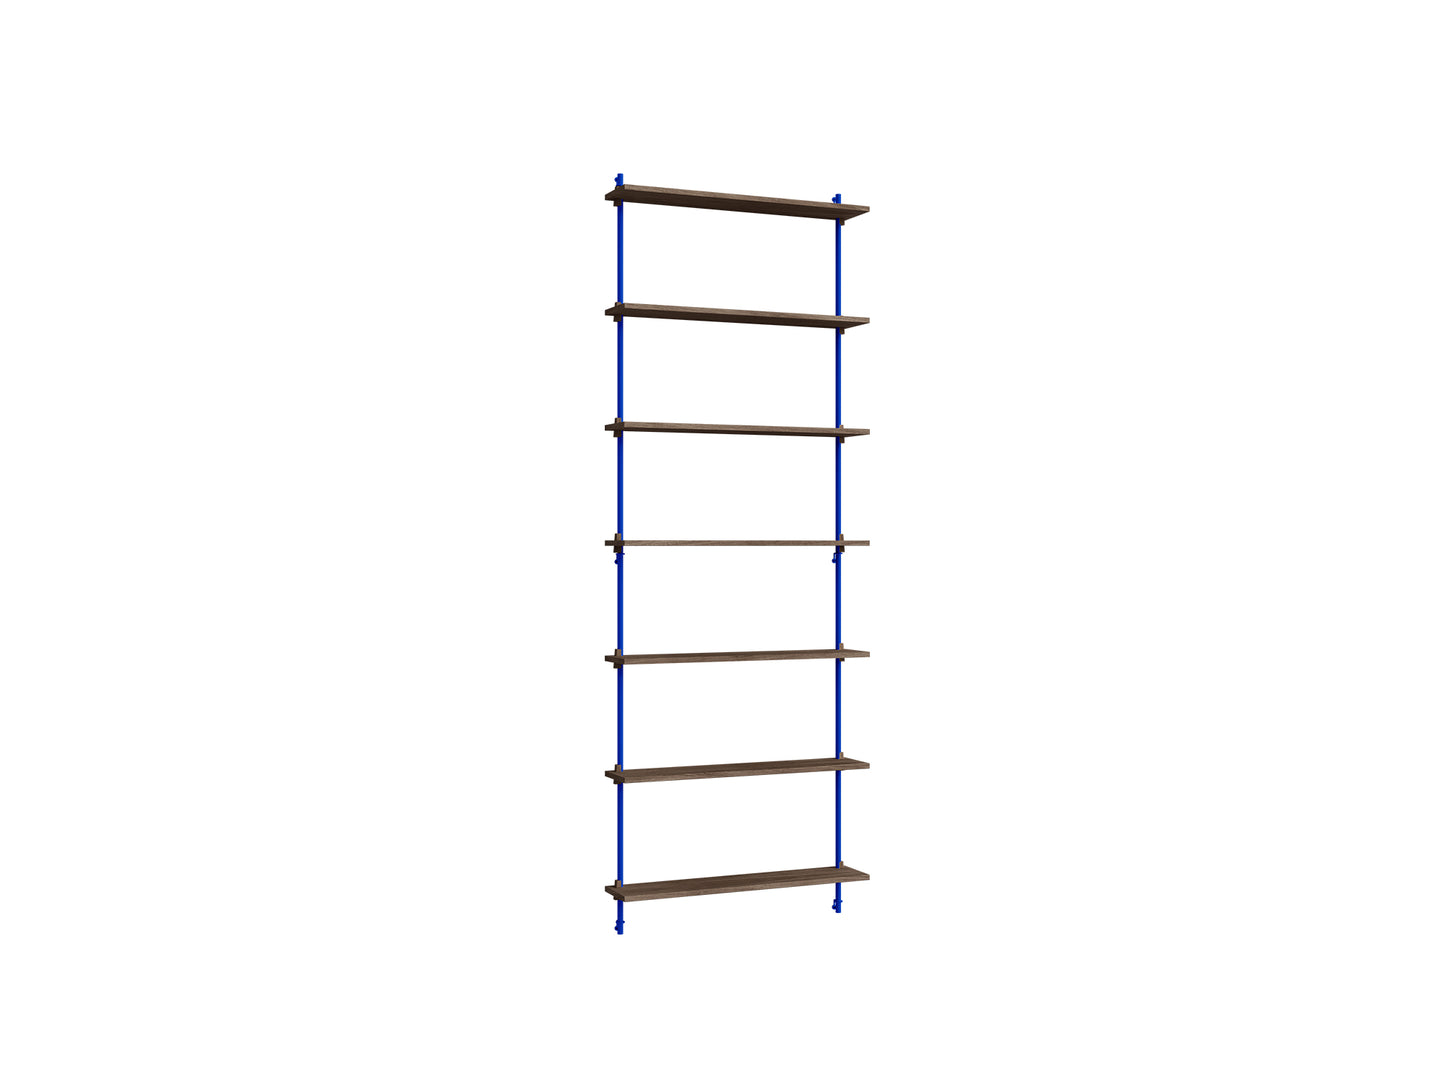 Wall Shelving System Sets (230 cm) by Moebe - WS.230.1 / Deep Blue Uprights / Smoked Oak